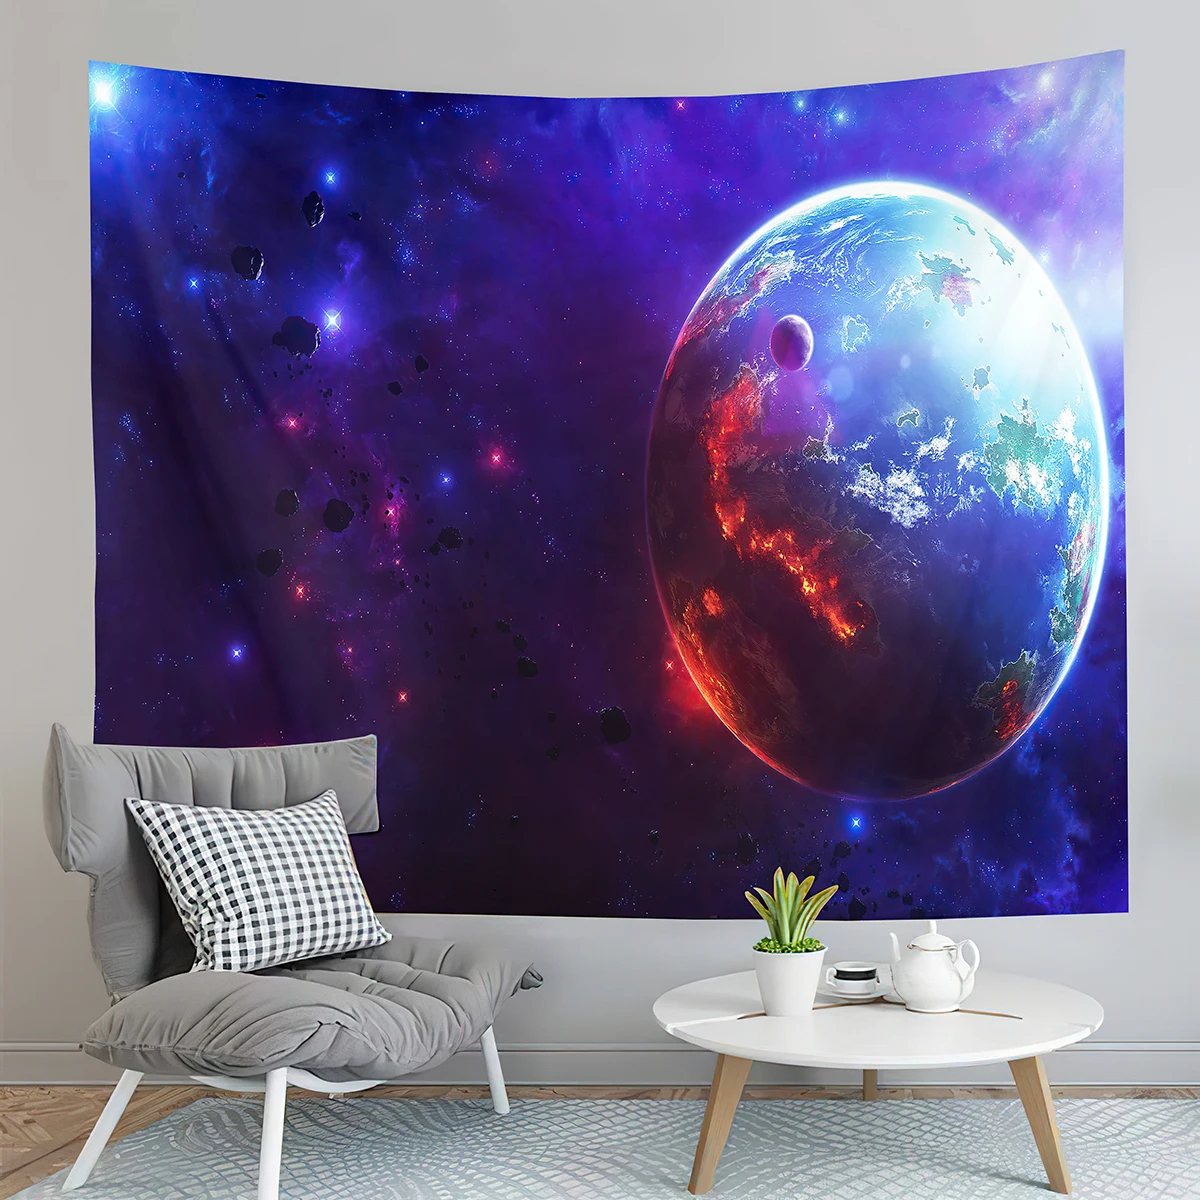 

Fantasy Galaxy Tapestry Universe Outer Space Earth Landscape Tapestry Wall Hanging Decor Tapestries Bedroom Living Room Dorm